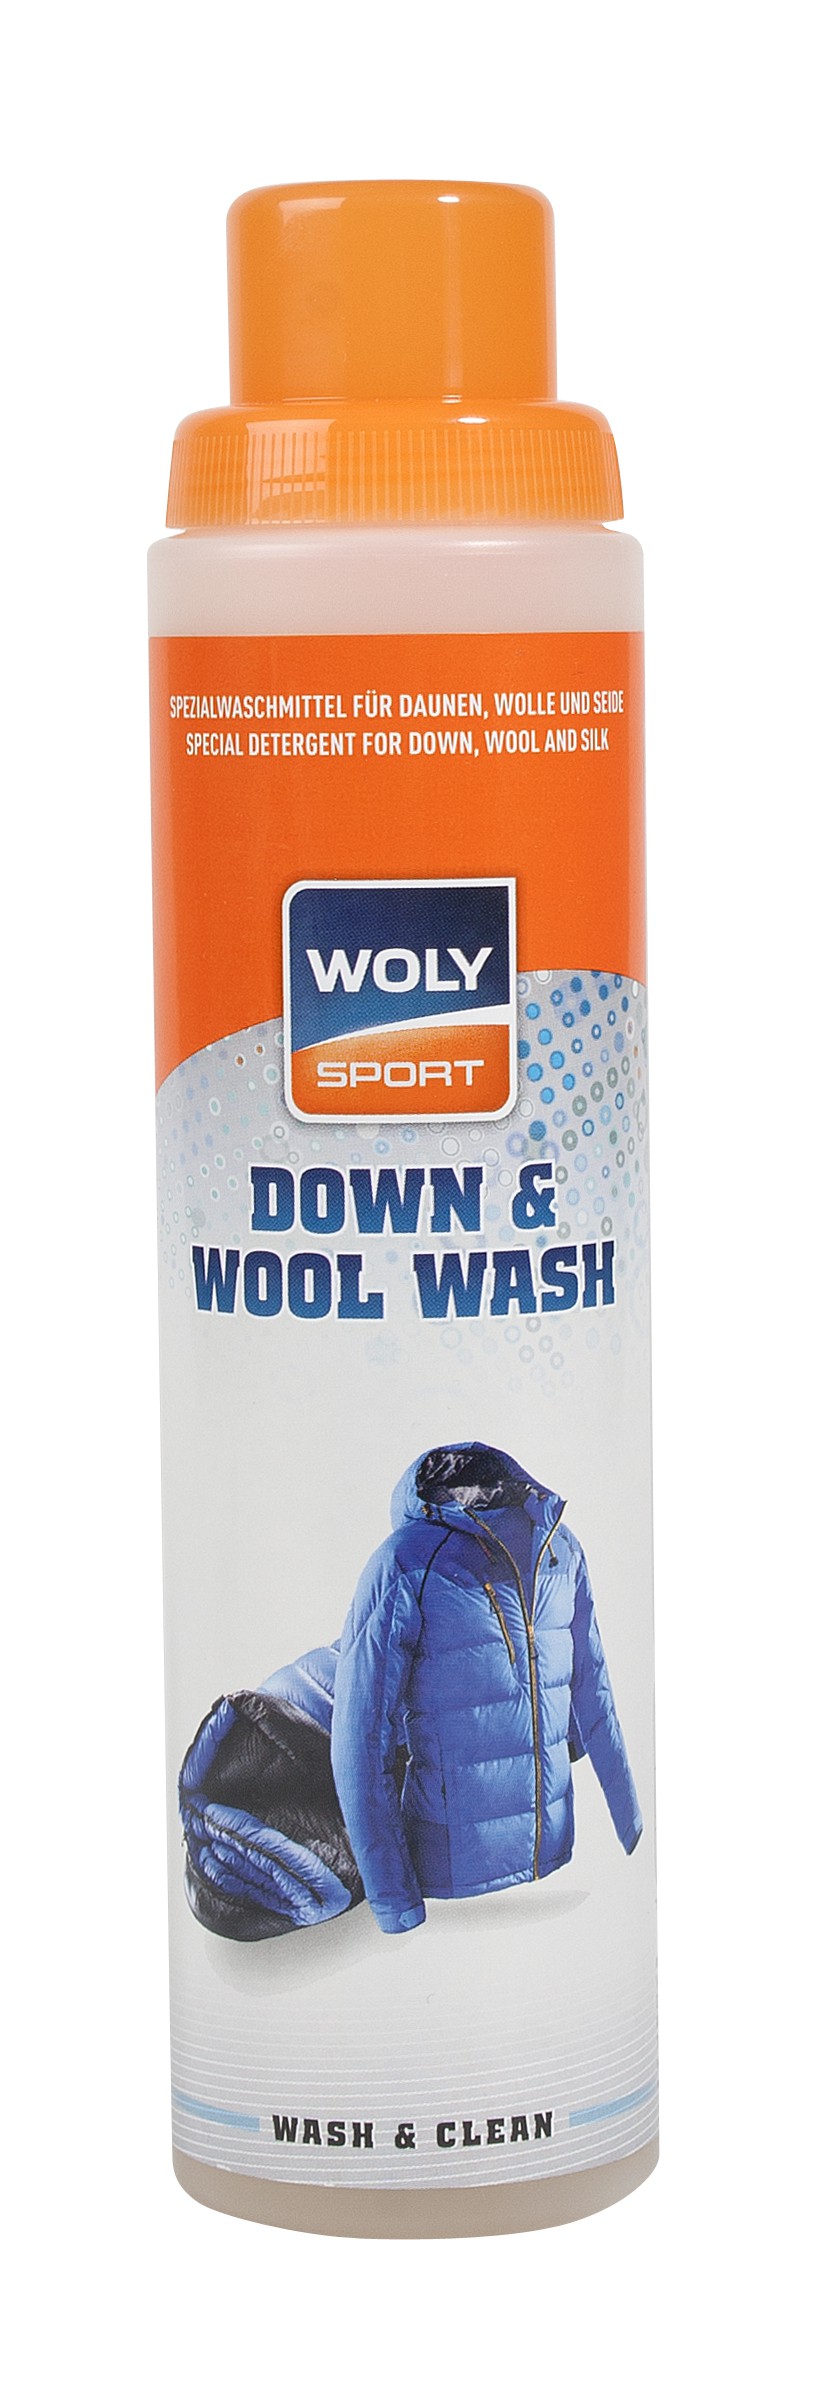 Select Woly - down & woolwash 